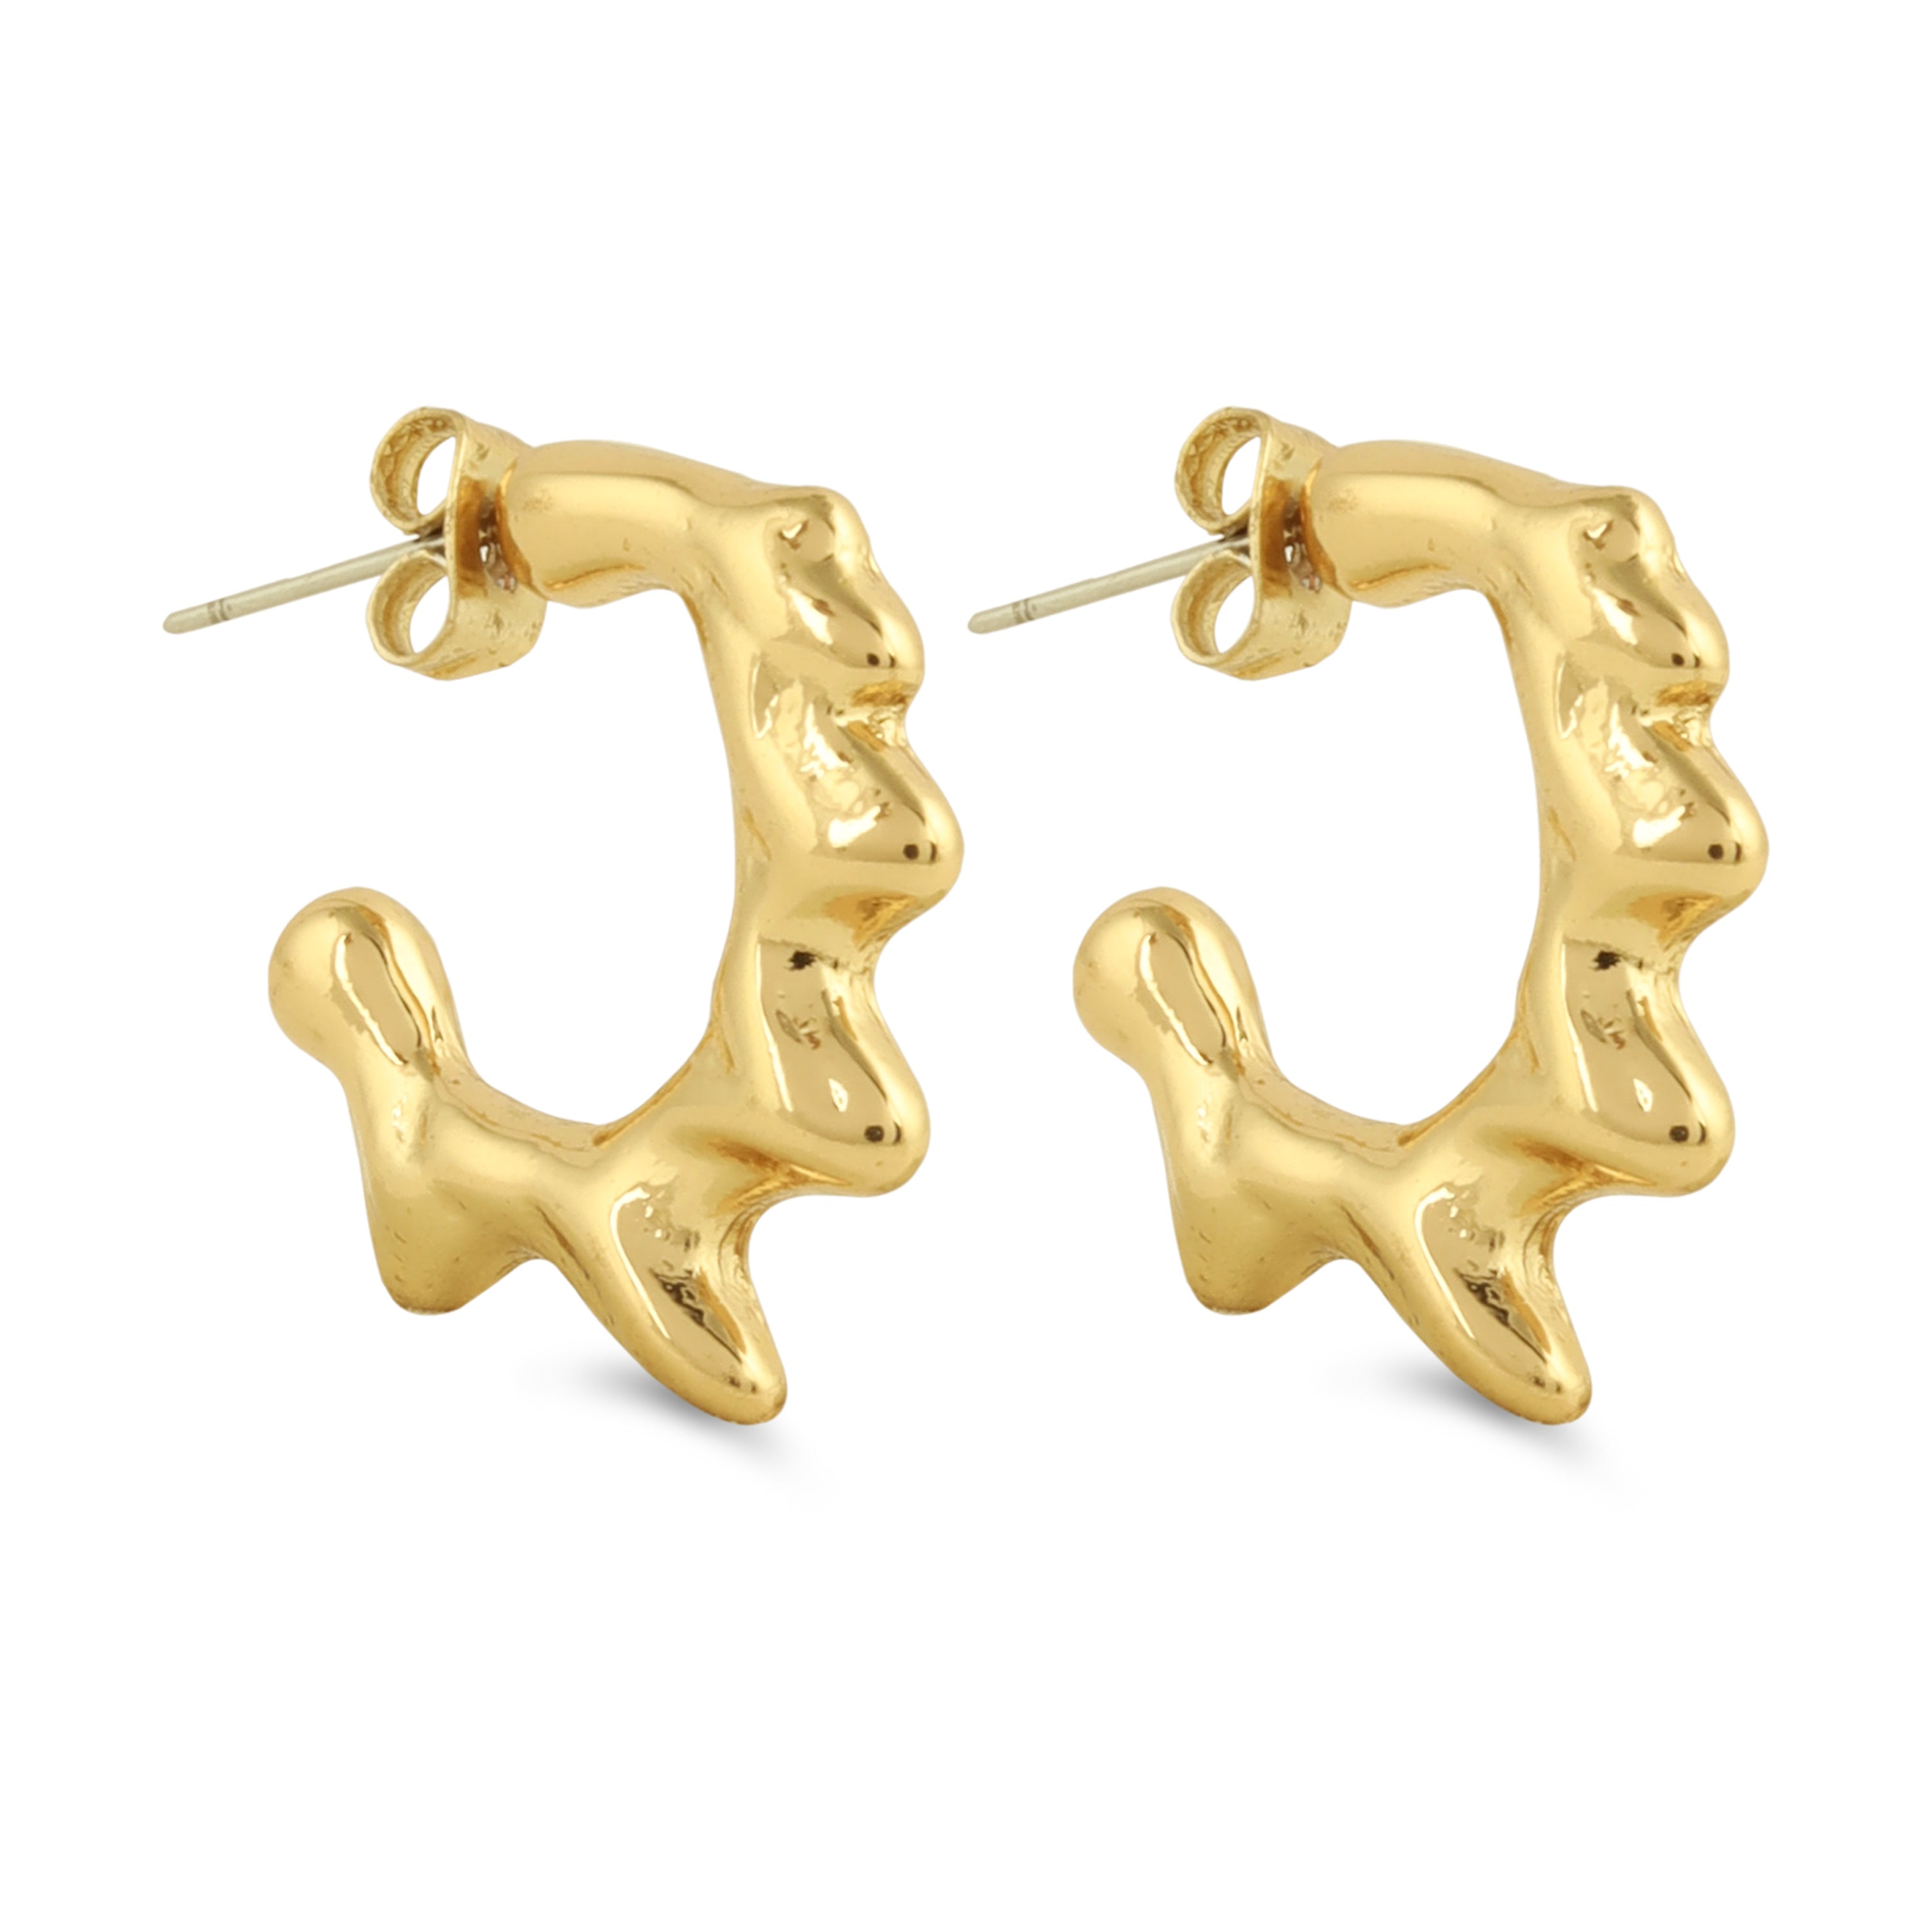 TFC Melted Ice Gold Plated Hoop Earrings-Discover daily wear gold earrings including stud earrings, hoop earrings, and pearl earrings, perfect as earrings for women and earrings for girls.Find the cheapest fashion jewellery which is anti-tarnis​h only at The Fun company.